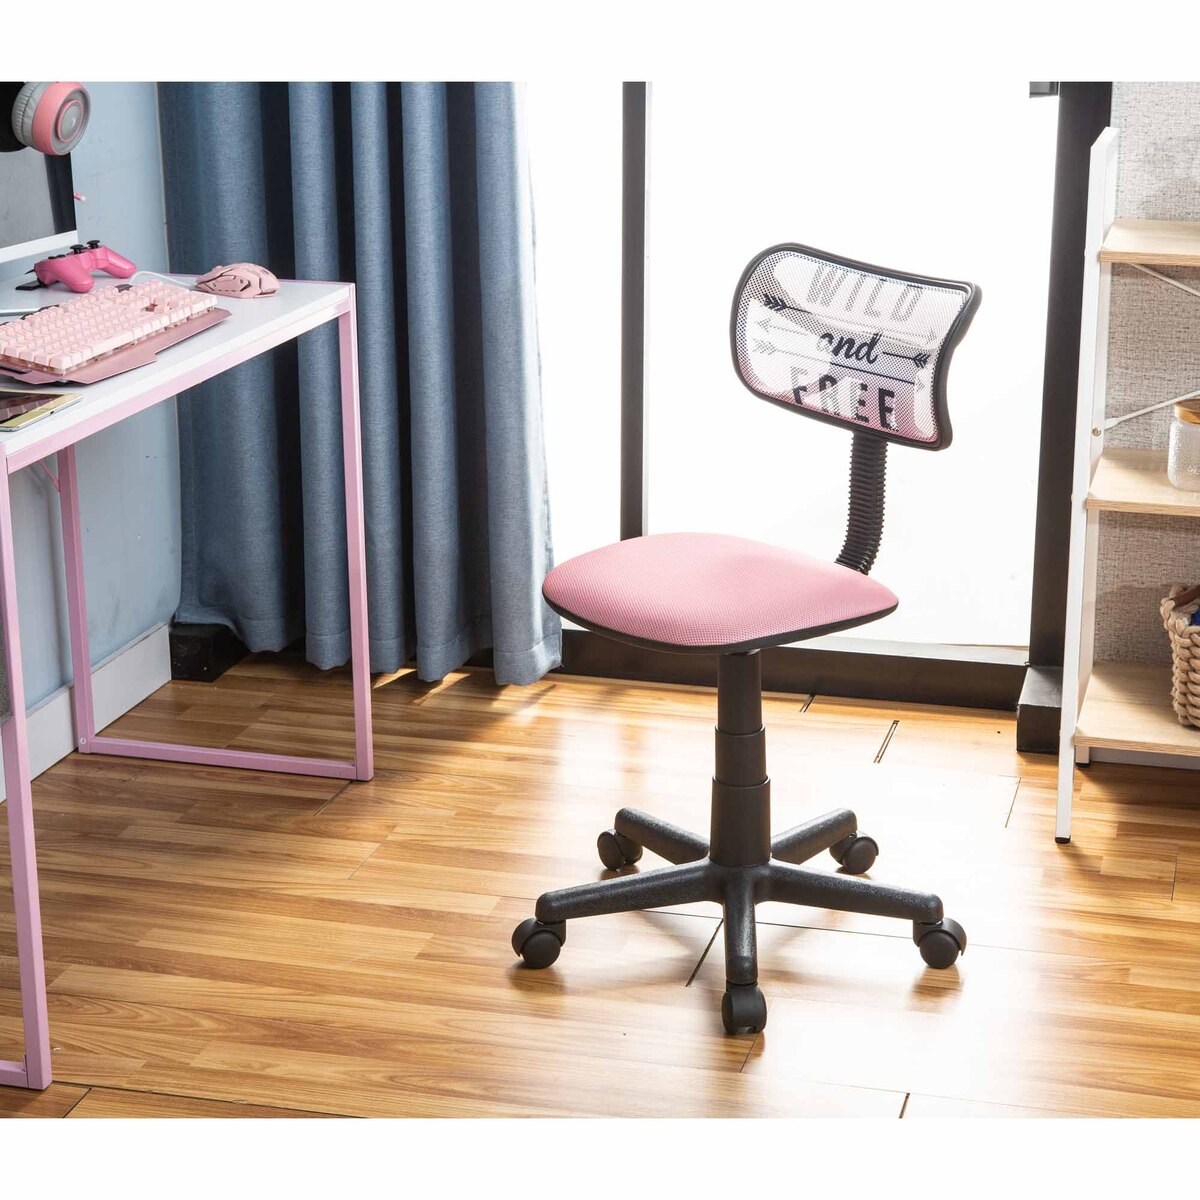 Maple Leaf Adjustable Kids Chair, Office, Computer Chair for Students With Swivel Wheels Wild and free WK656641